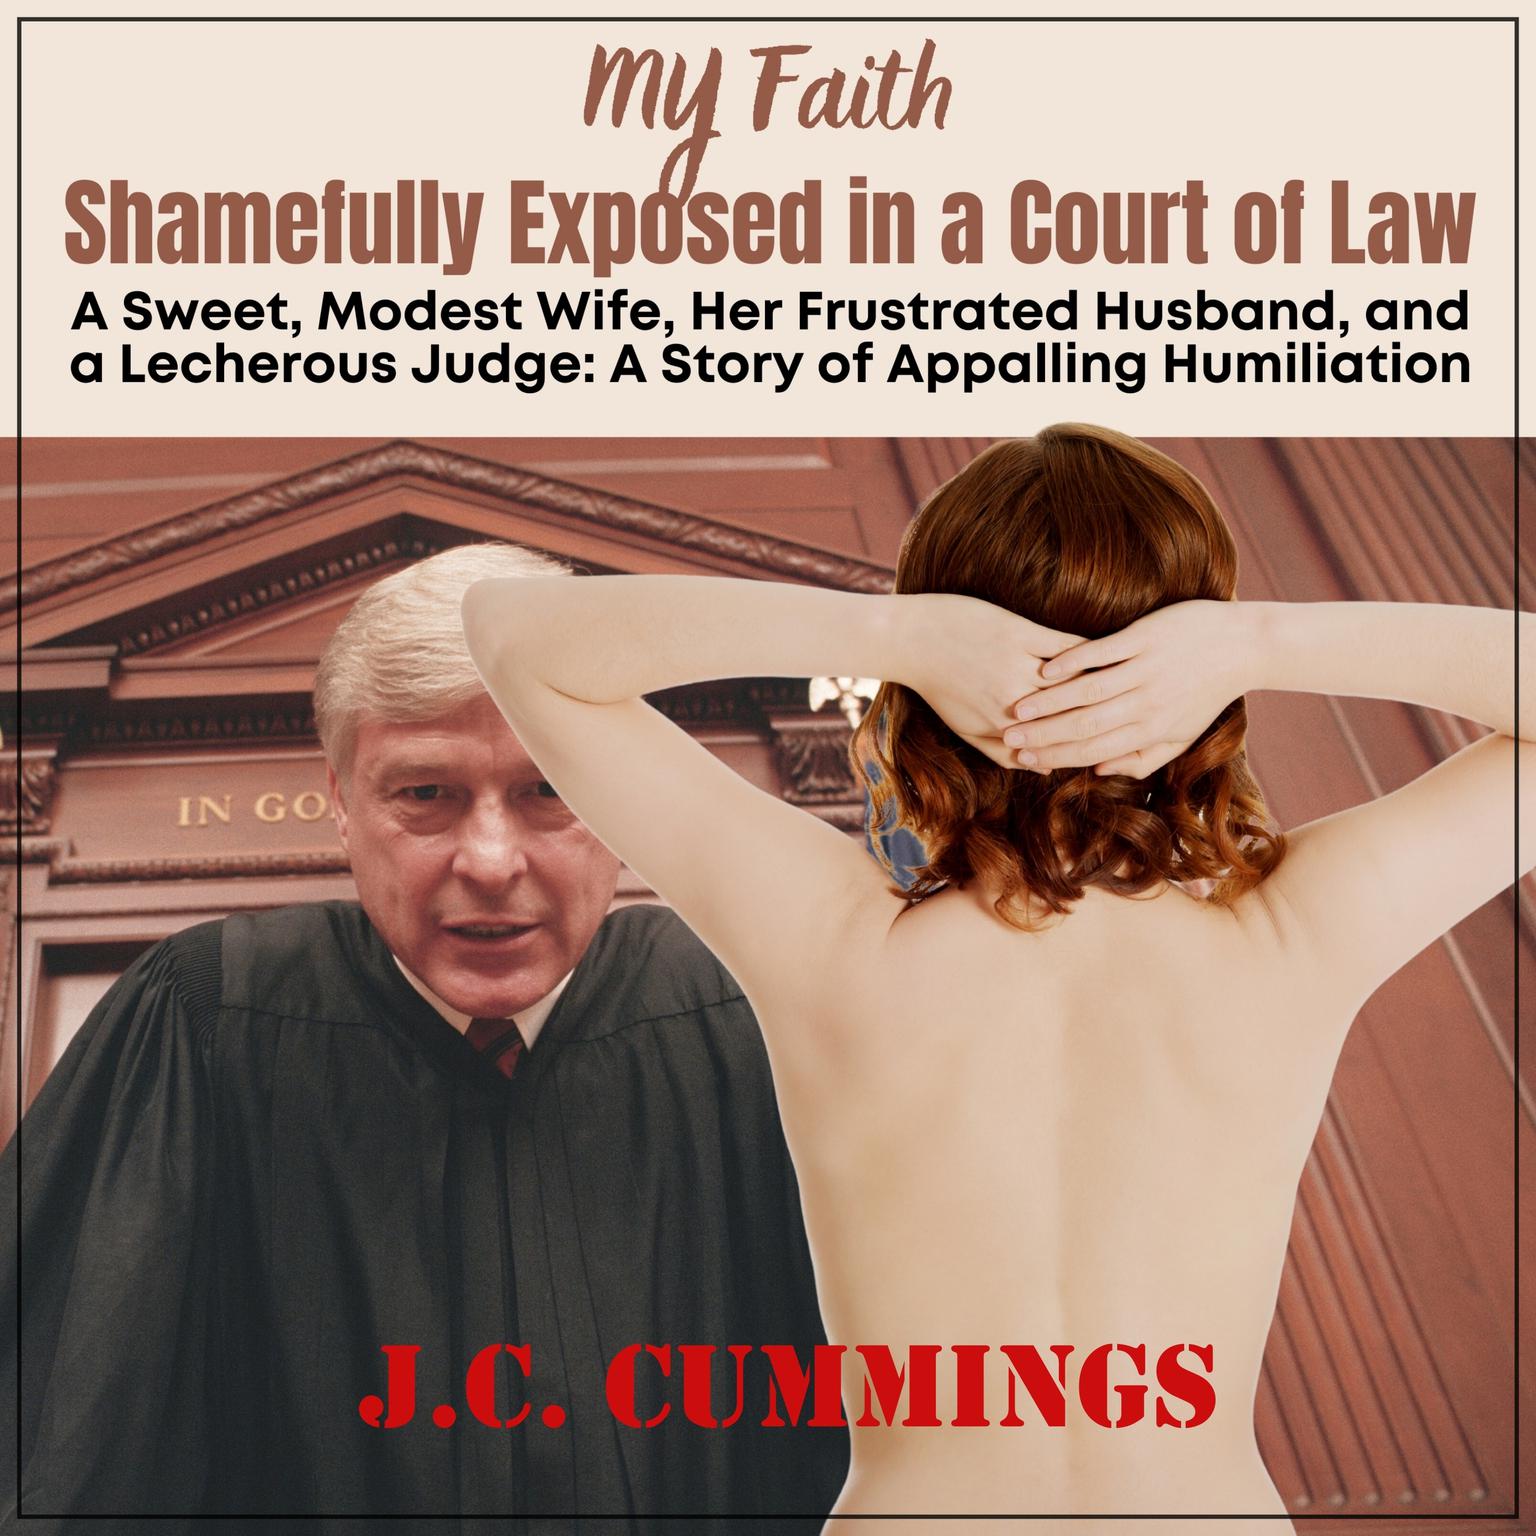 My Faith--Shamefully Exposed in a Court of Law: A Sweet, Modest Wife, Her Frustrated Husband, and a Lecherous Judge Audiobook, by J.C. Cummings